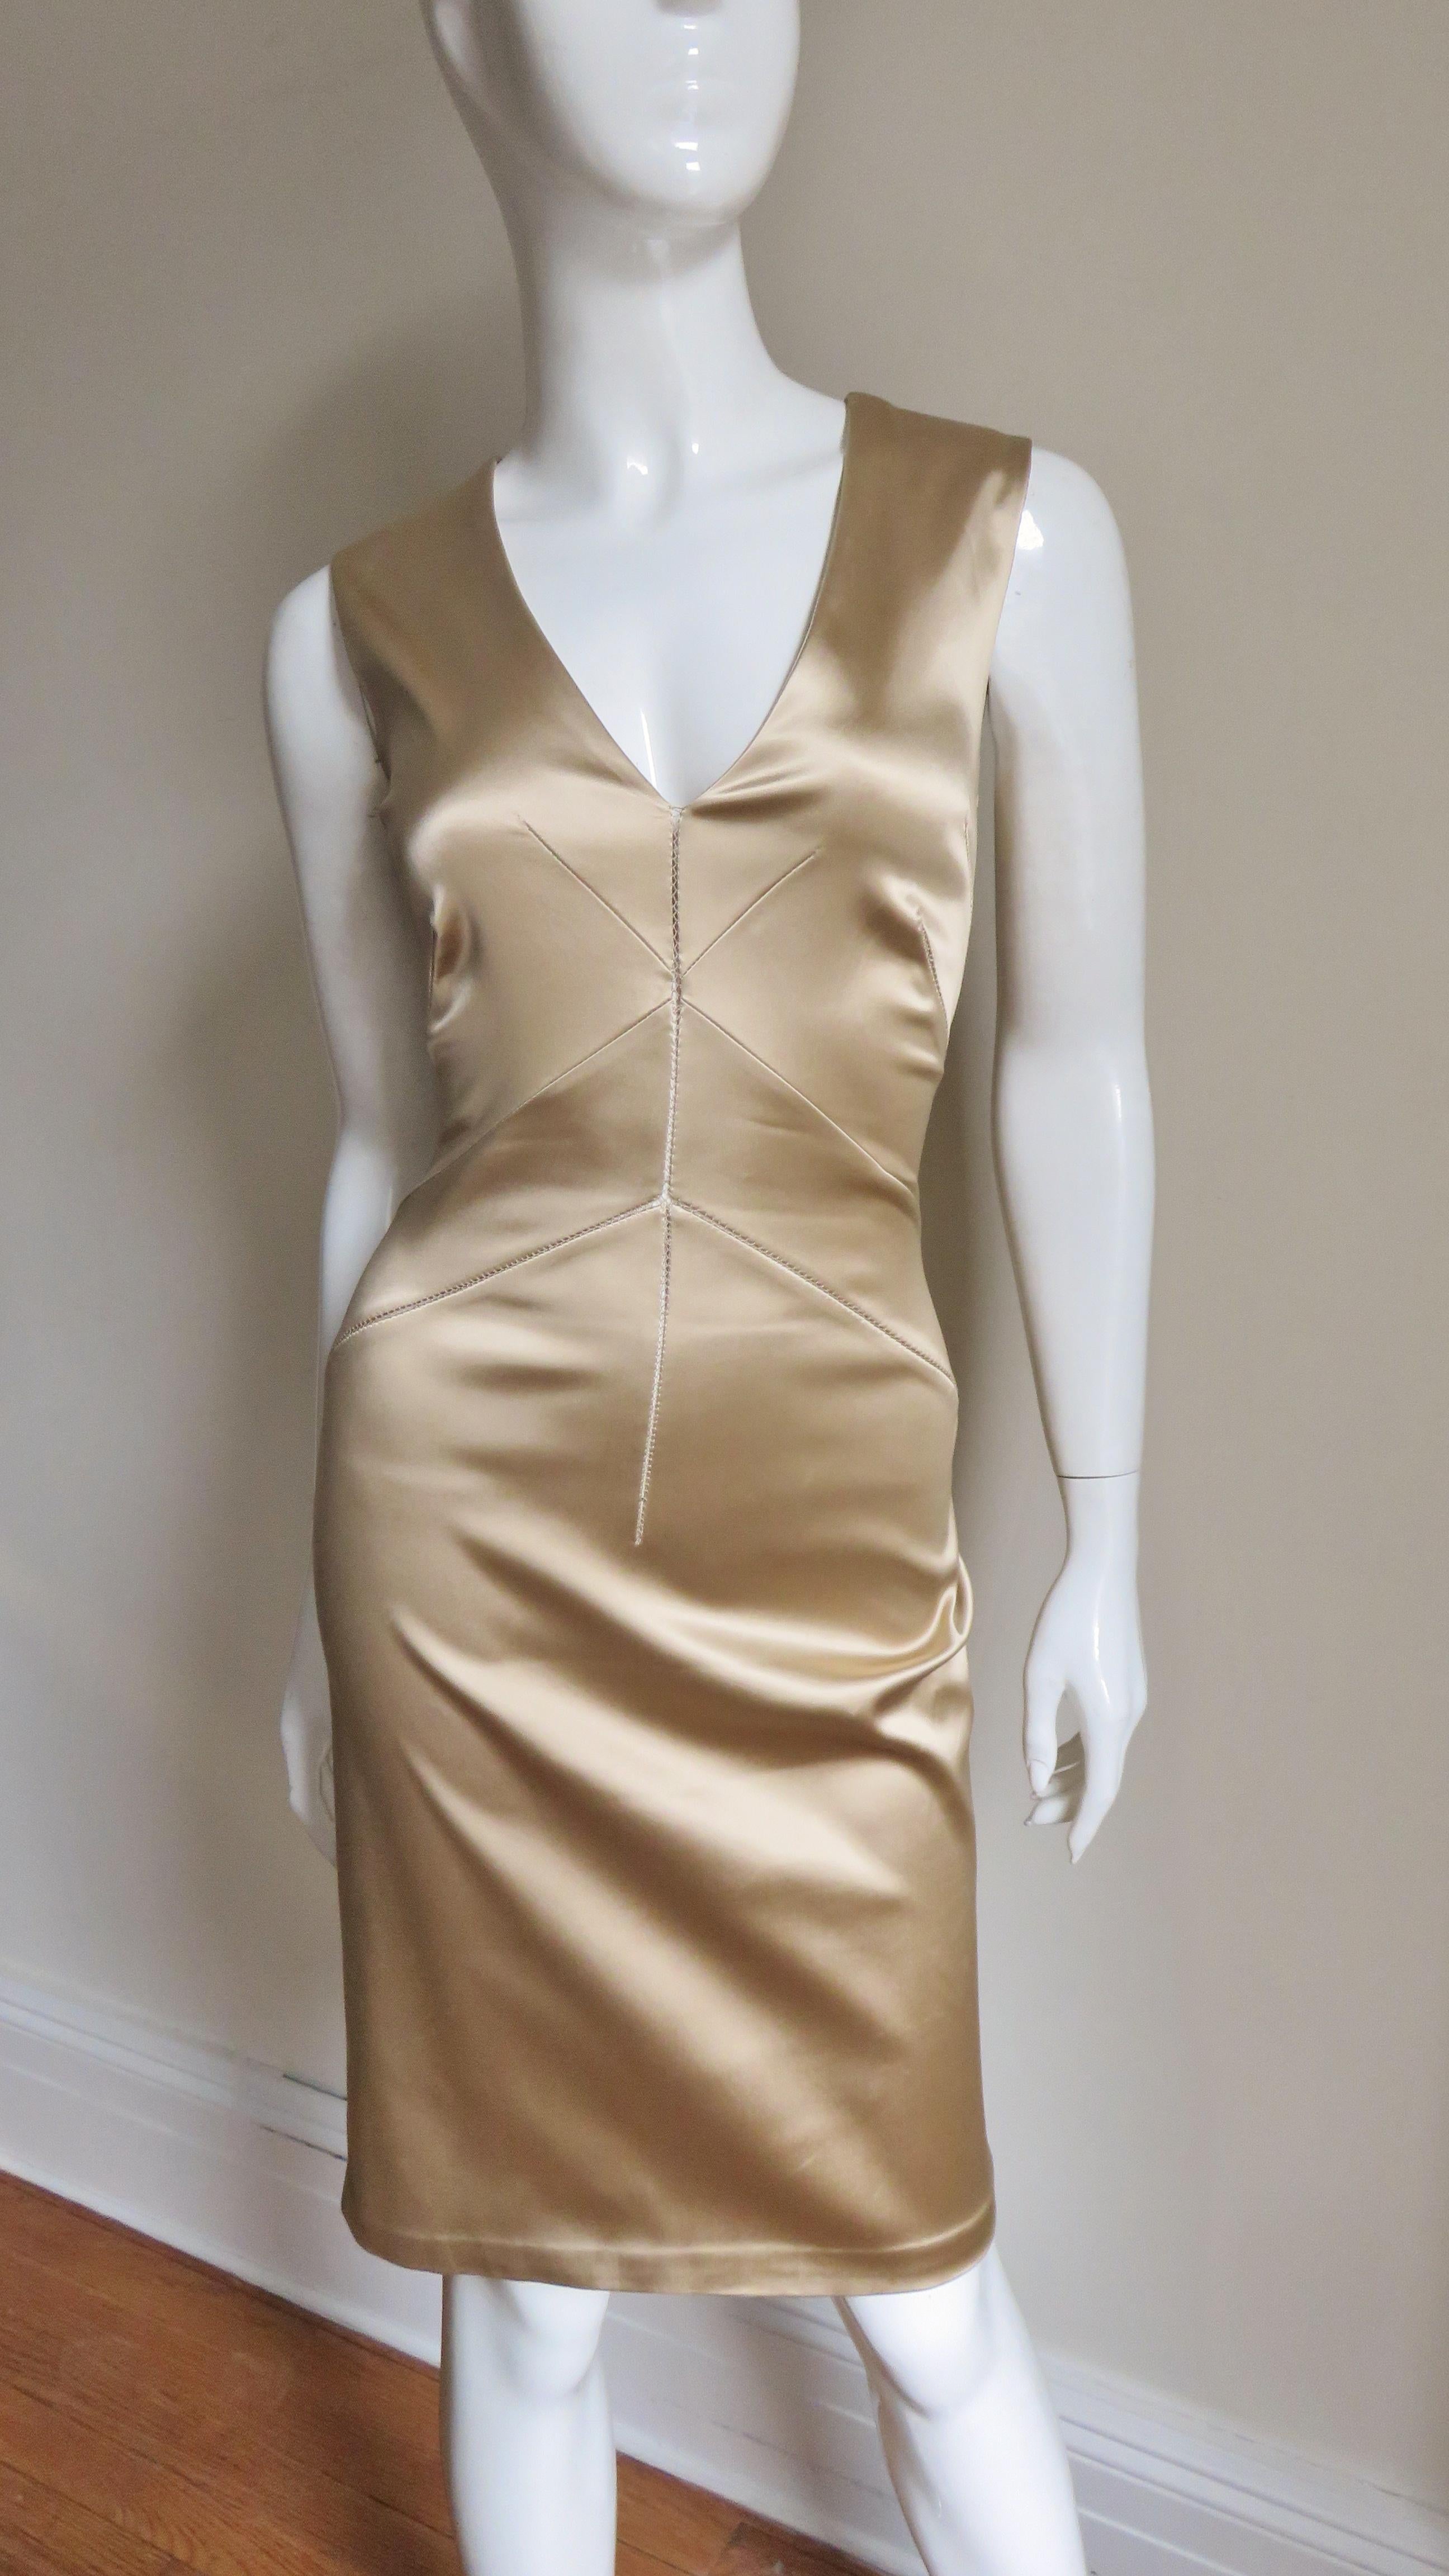 A fabulous gold stretch satin dress from Dolce and Gabbana.  It is sleeveless with a V neckline front and back and a body conscious fit created through the fabric and angular seaming.  It closes up the back with hooks and eyes hidden under a